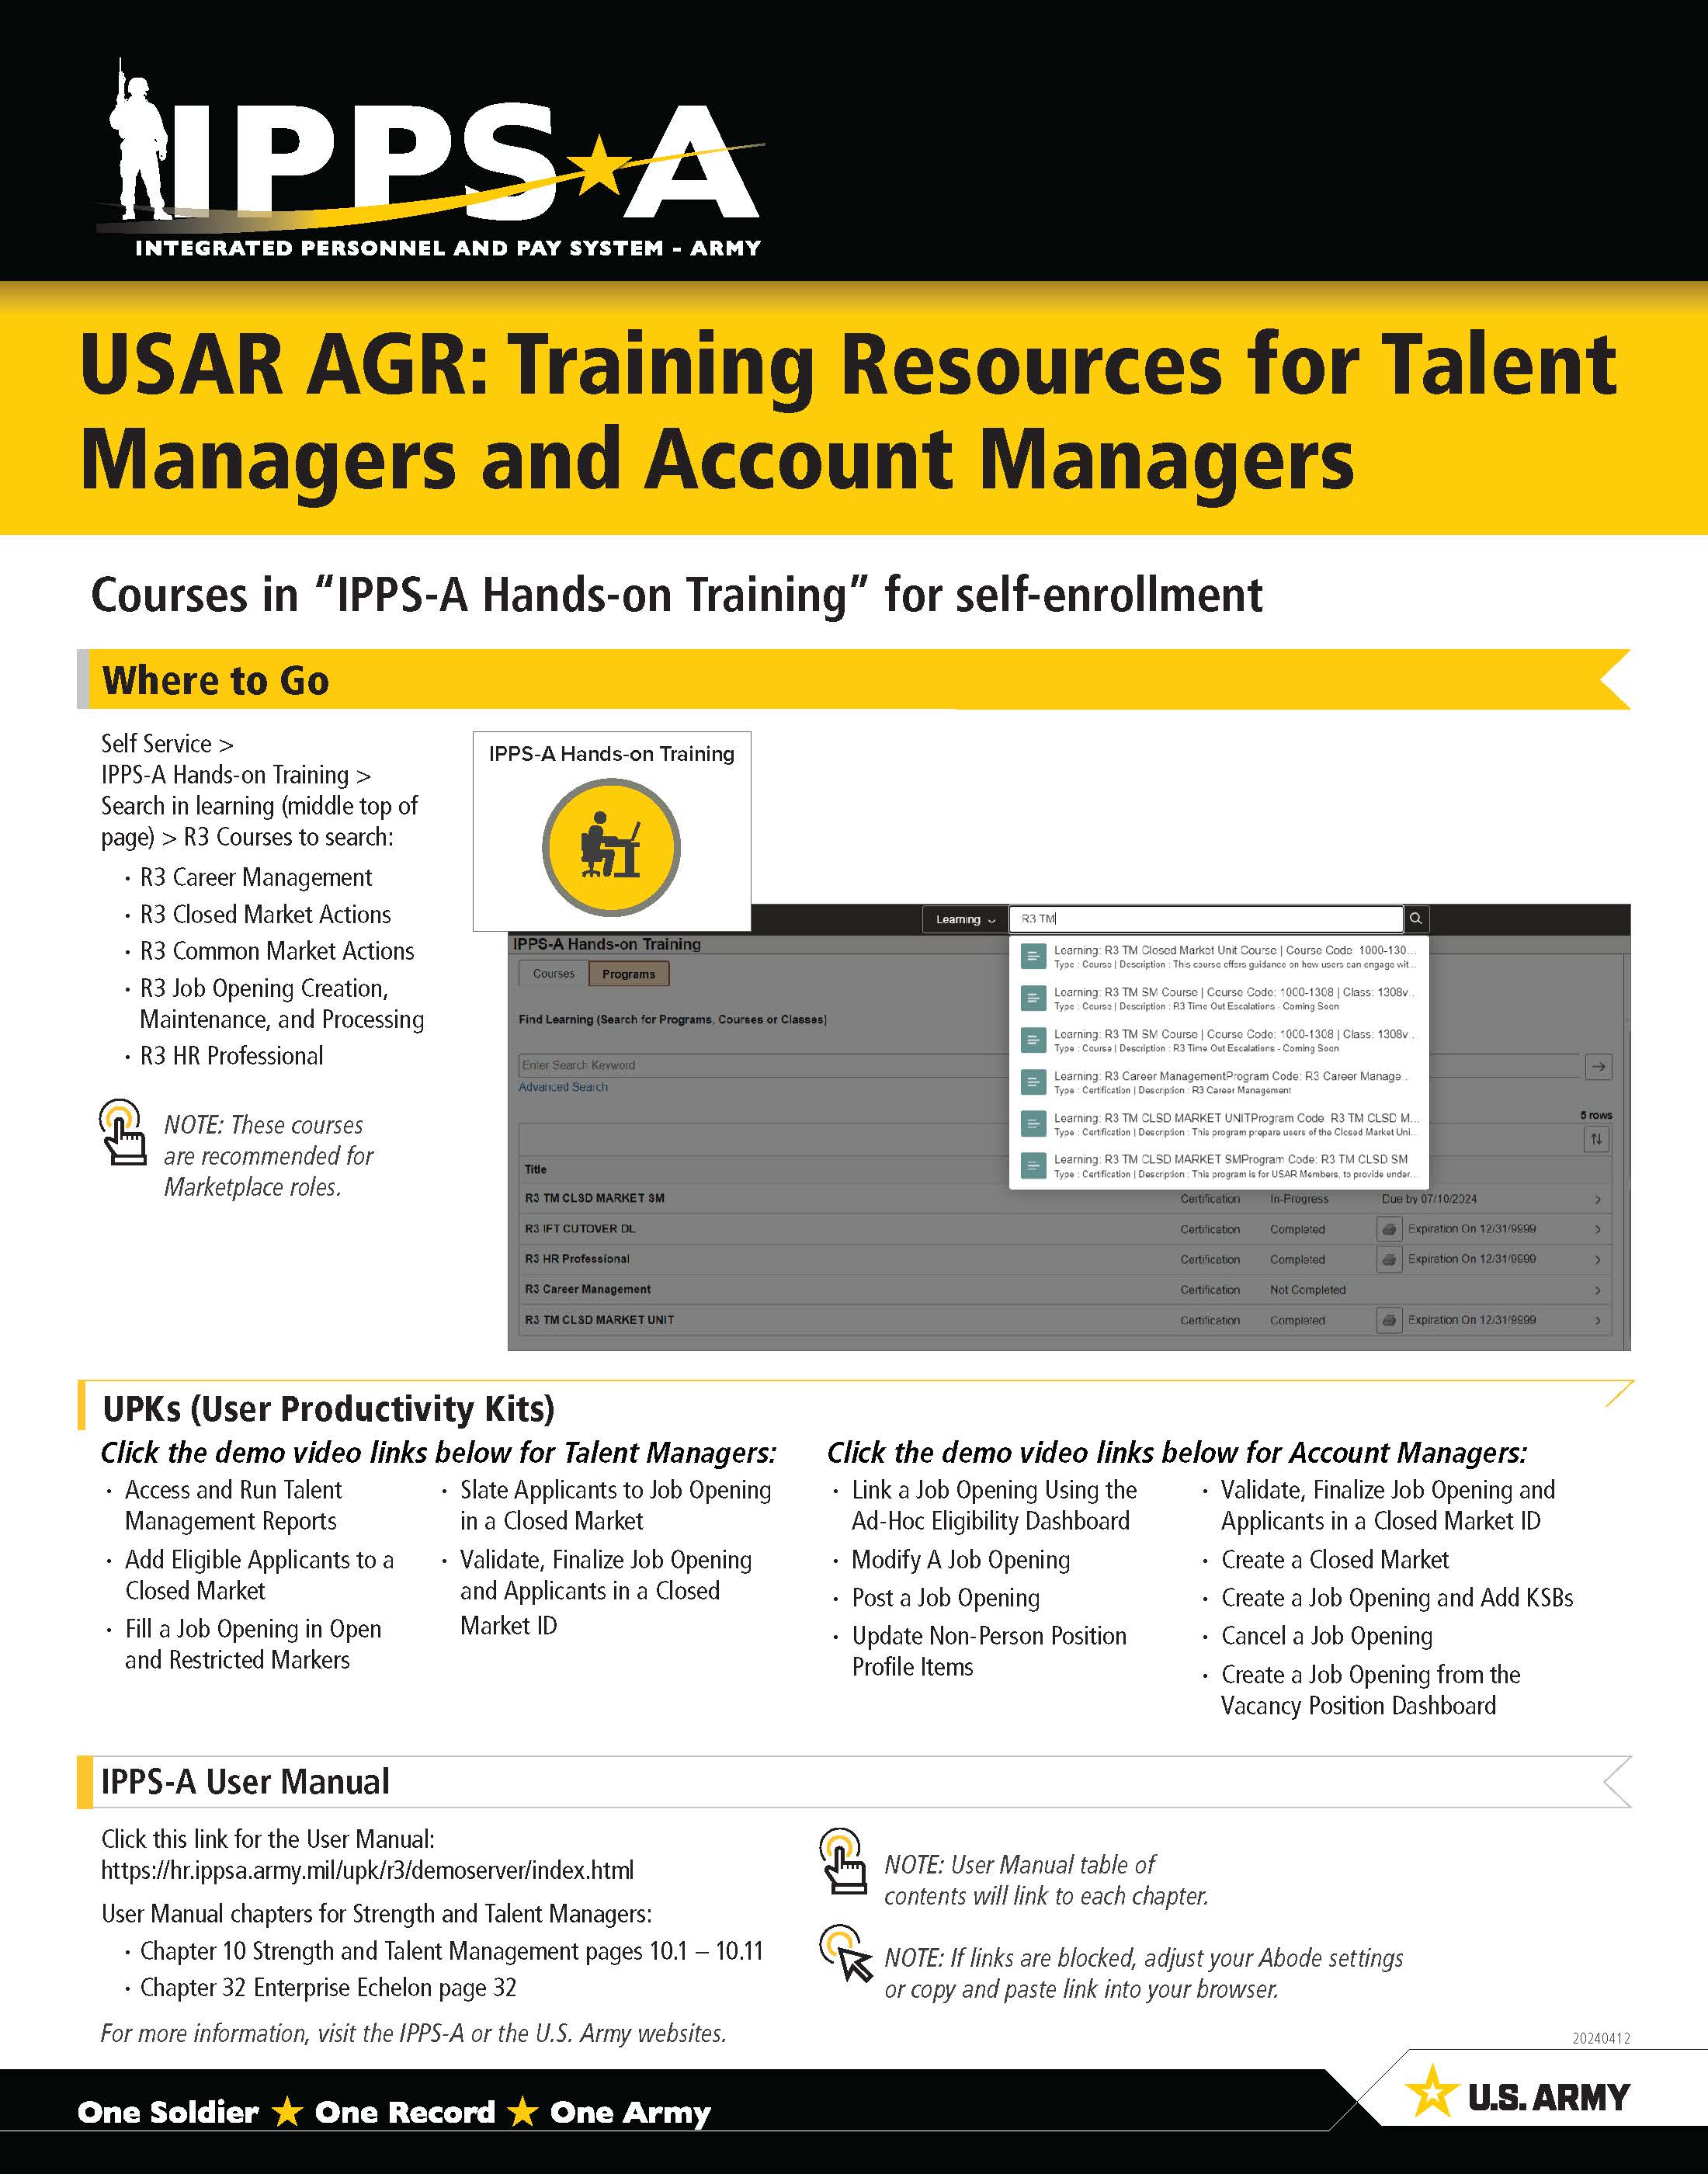 Link to USAR AGR: Training Resources for Talent & Account Managers